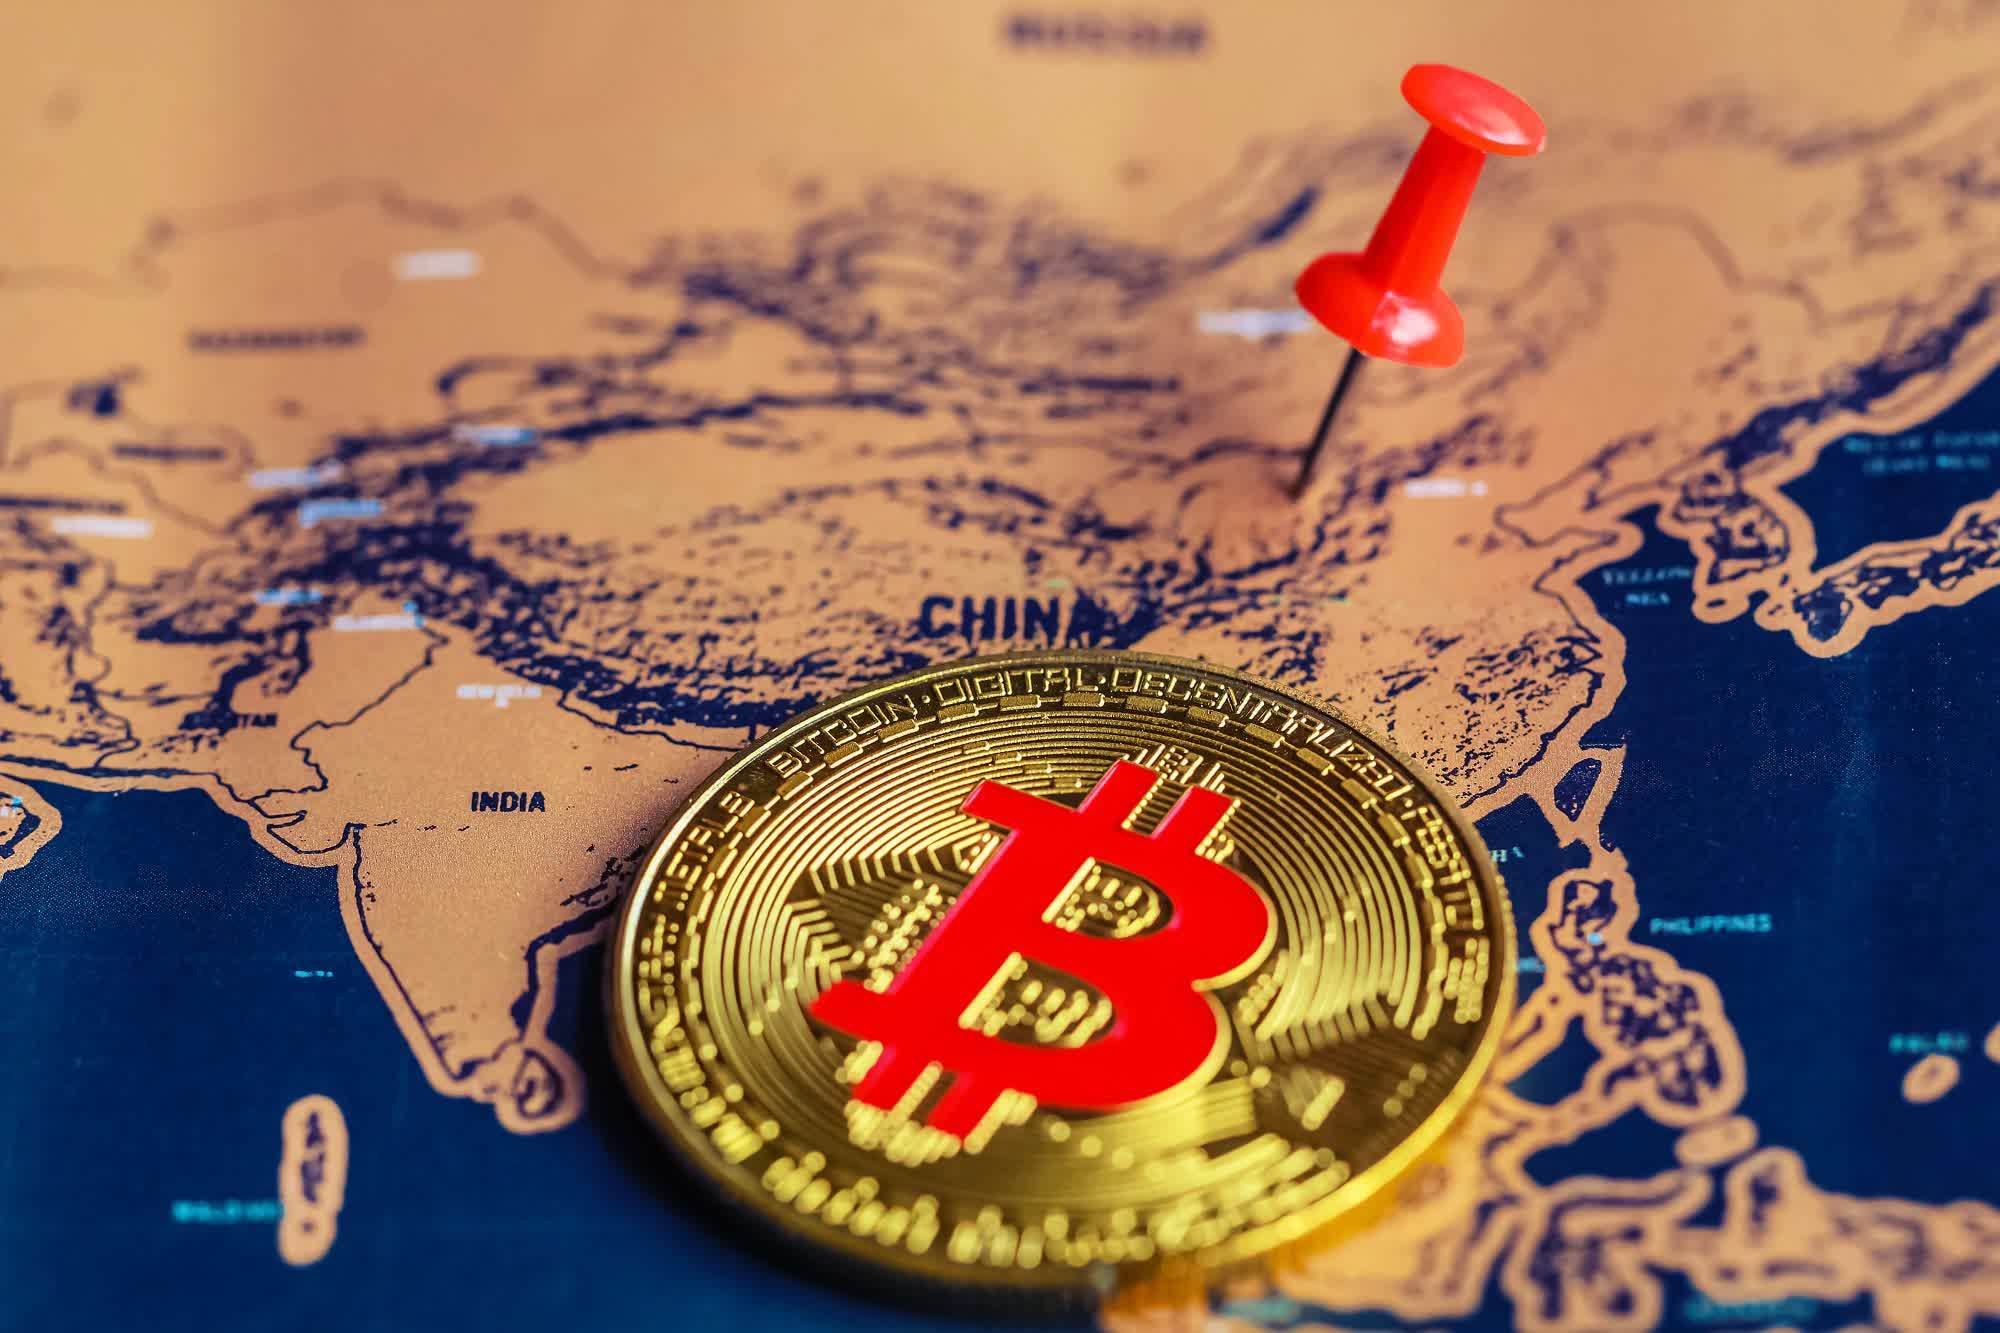 China declares all cryptocurrency transactions illegal, Bitcoin price plummets